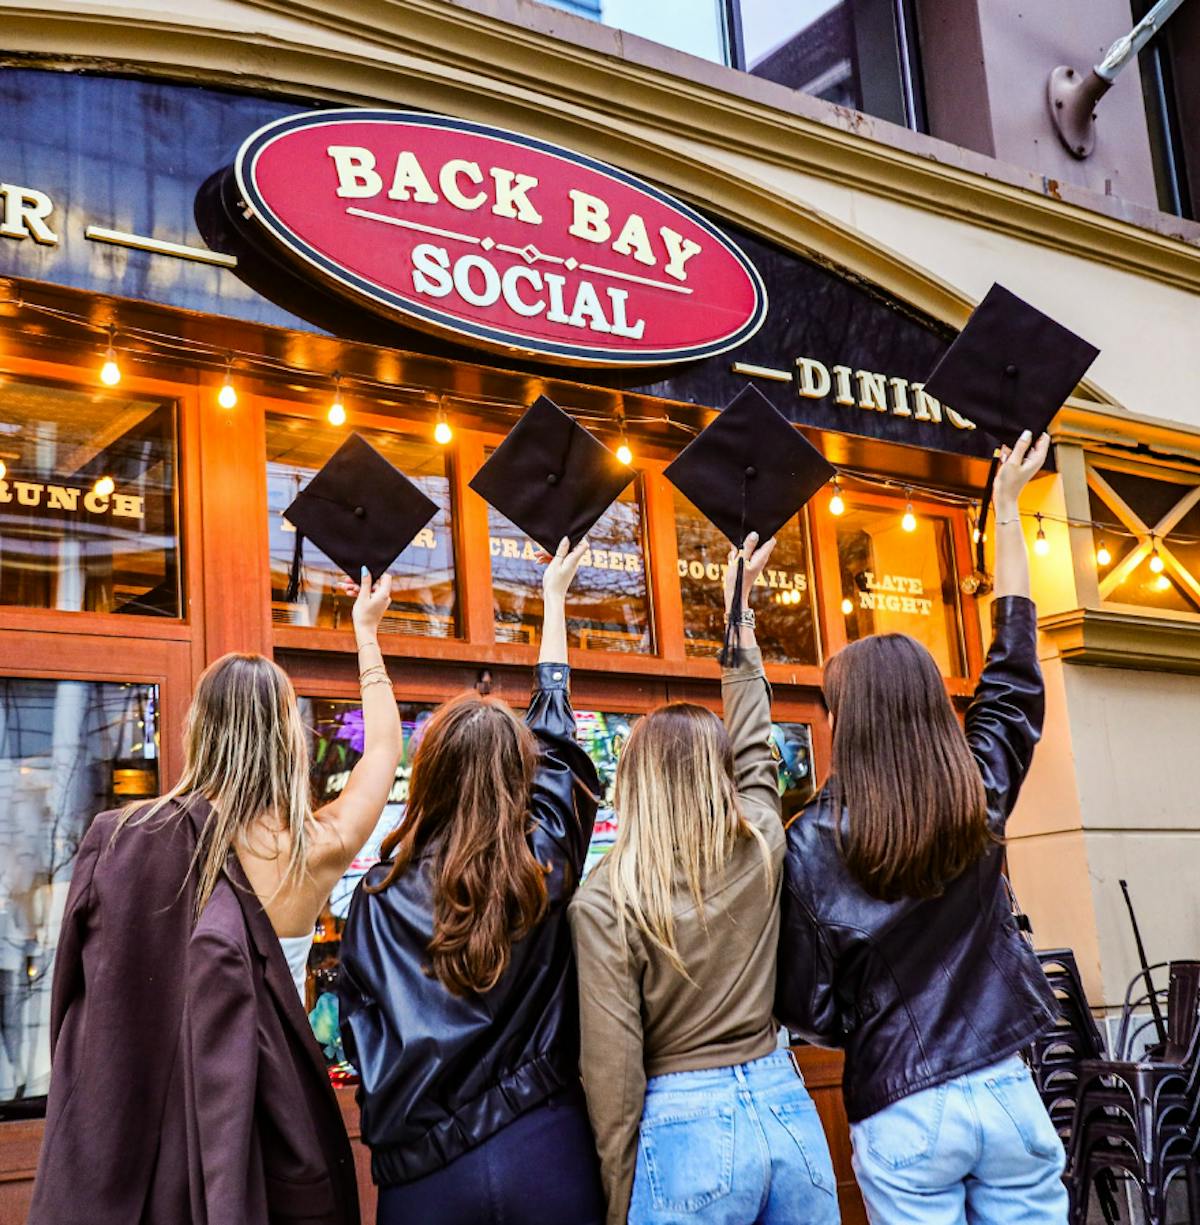 reserve your graduation party with back bay social